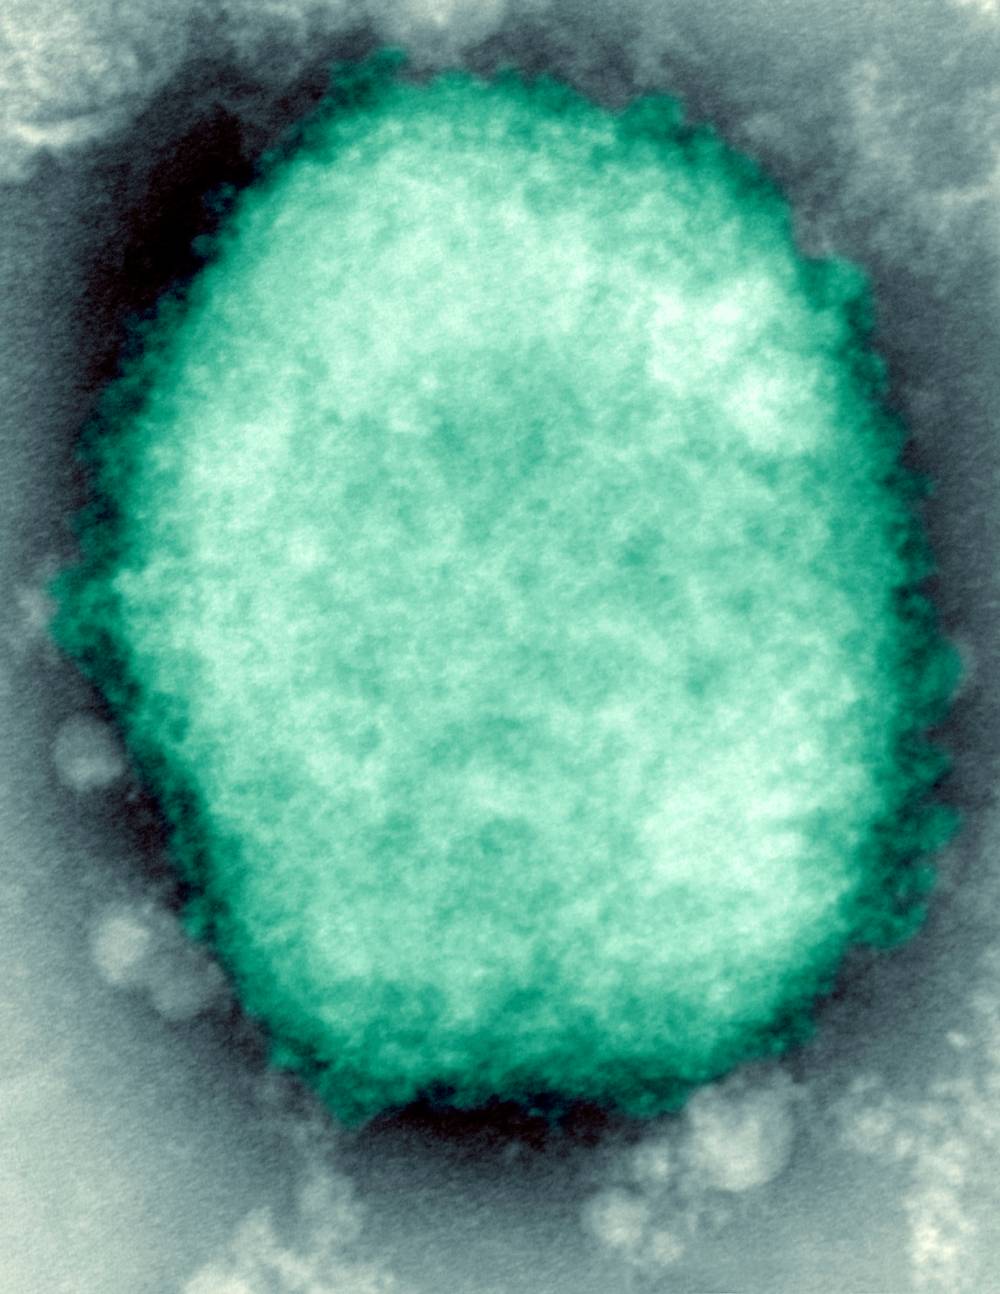 Monkeypox virus, represented with blueish-green colouring, present in human vesicular fluid that is depicted in monochromatic colouring